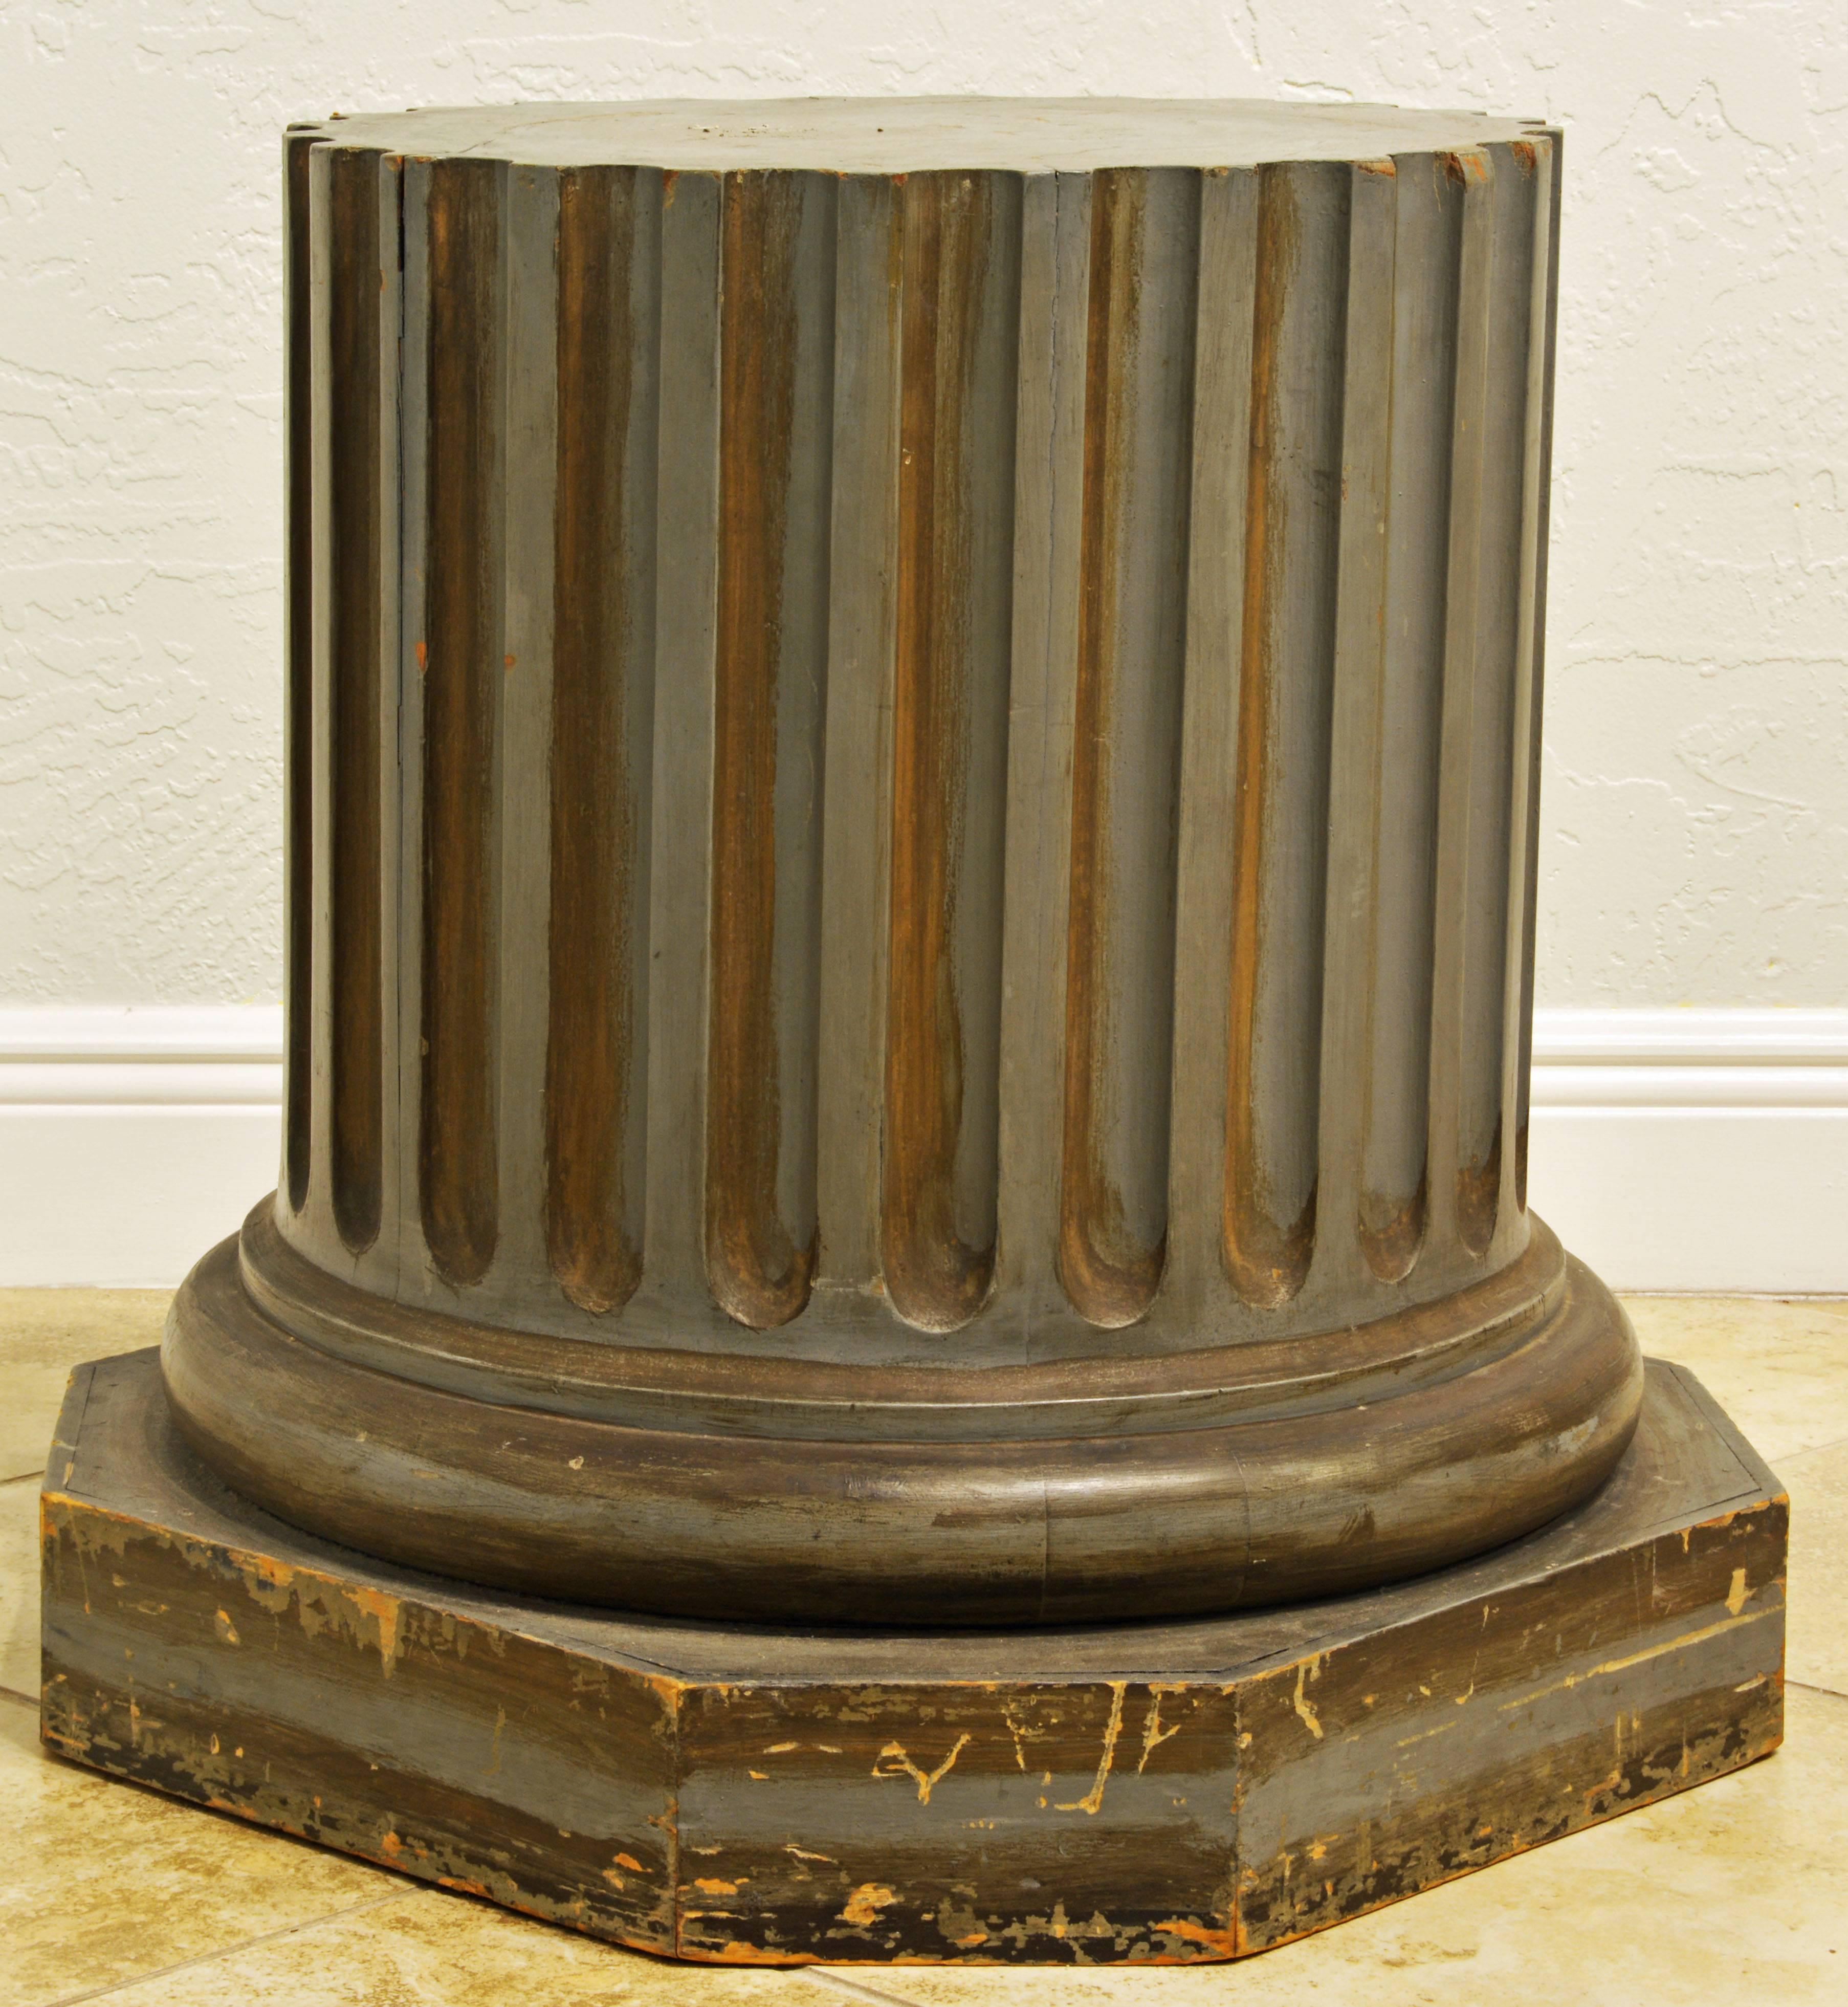 This almost Gustavian looking painted column base pedestal features a carved fluted column shaft on a circular moulded base resting on an octagonal stylobate. Very Classic and no nonsense. Great for a statue or even a glass top coffee table.